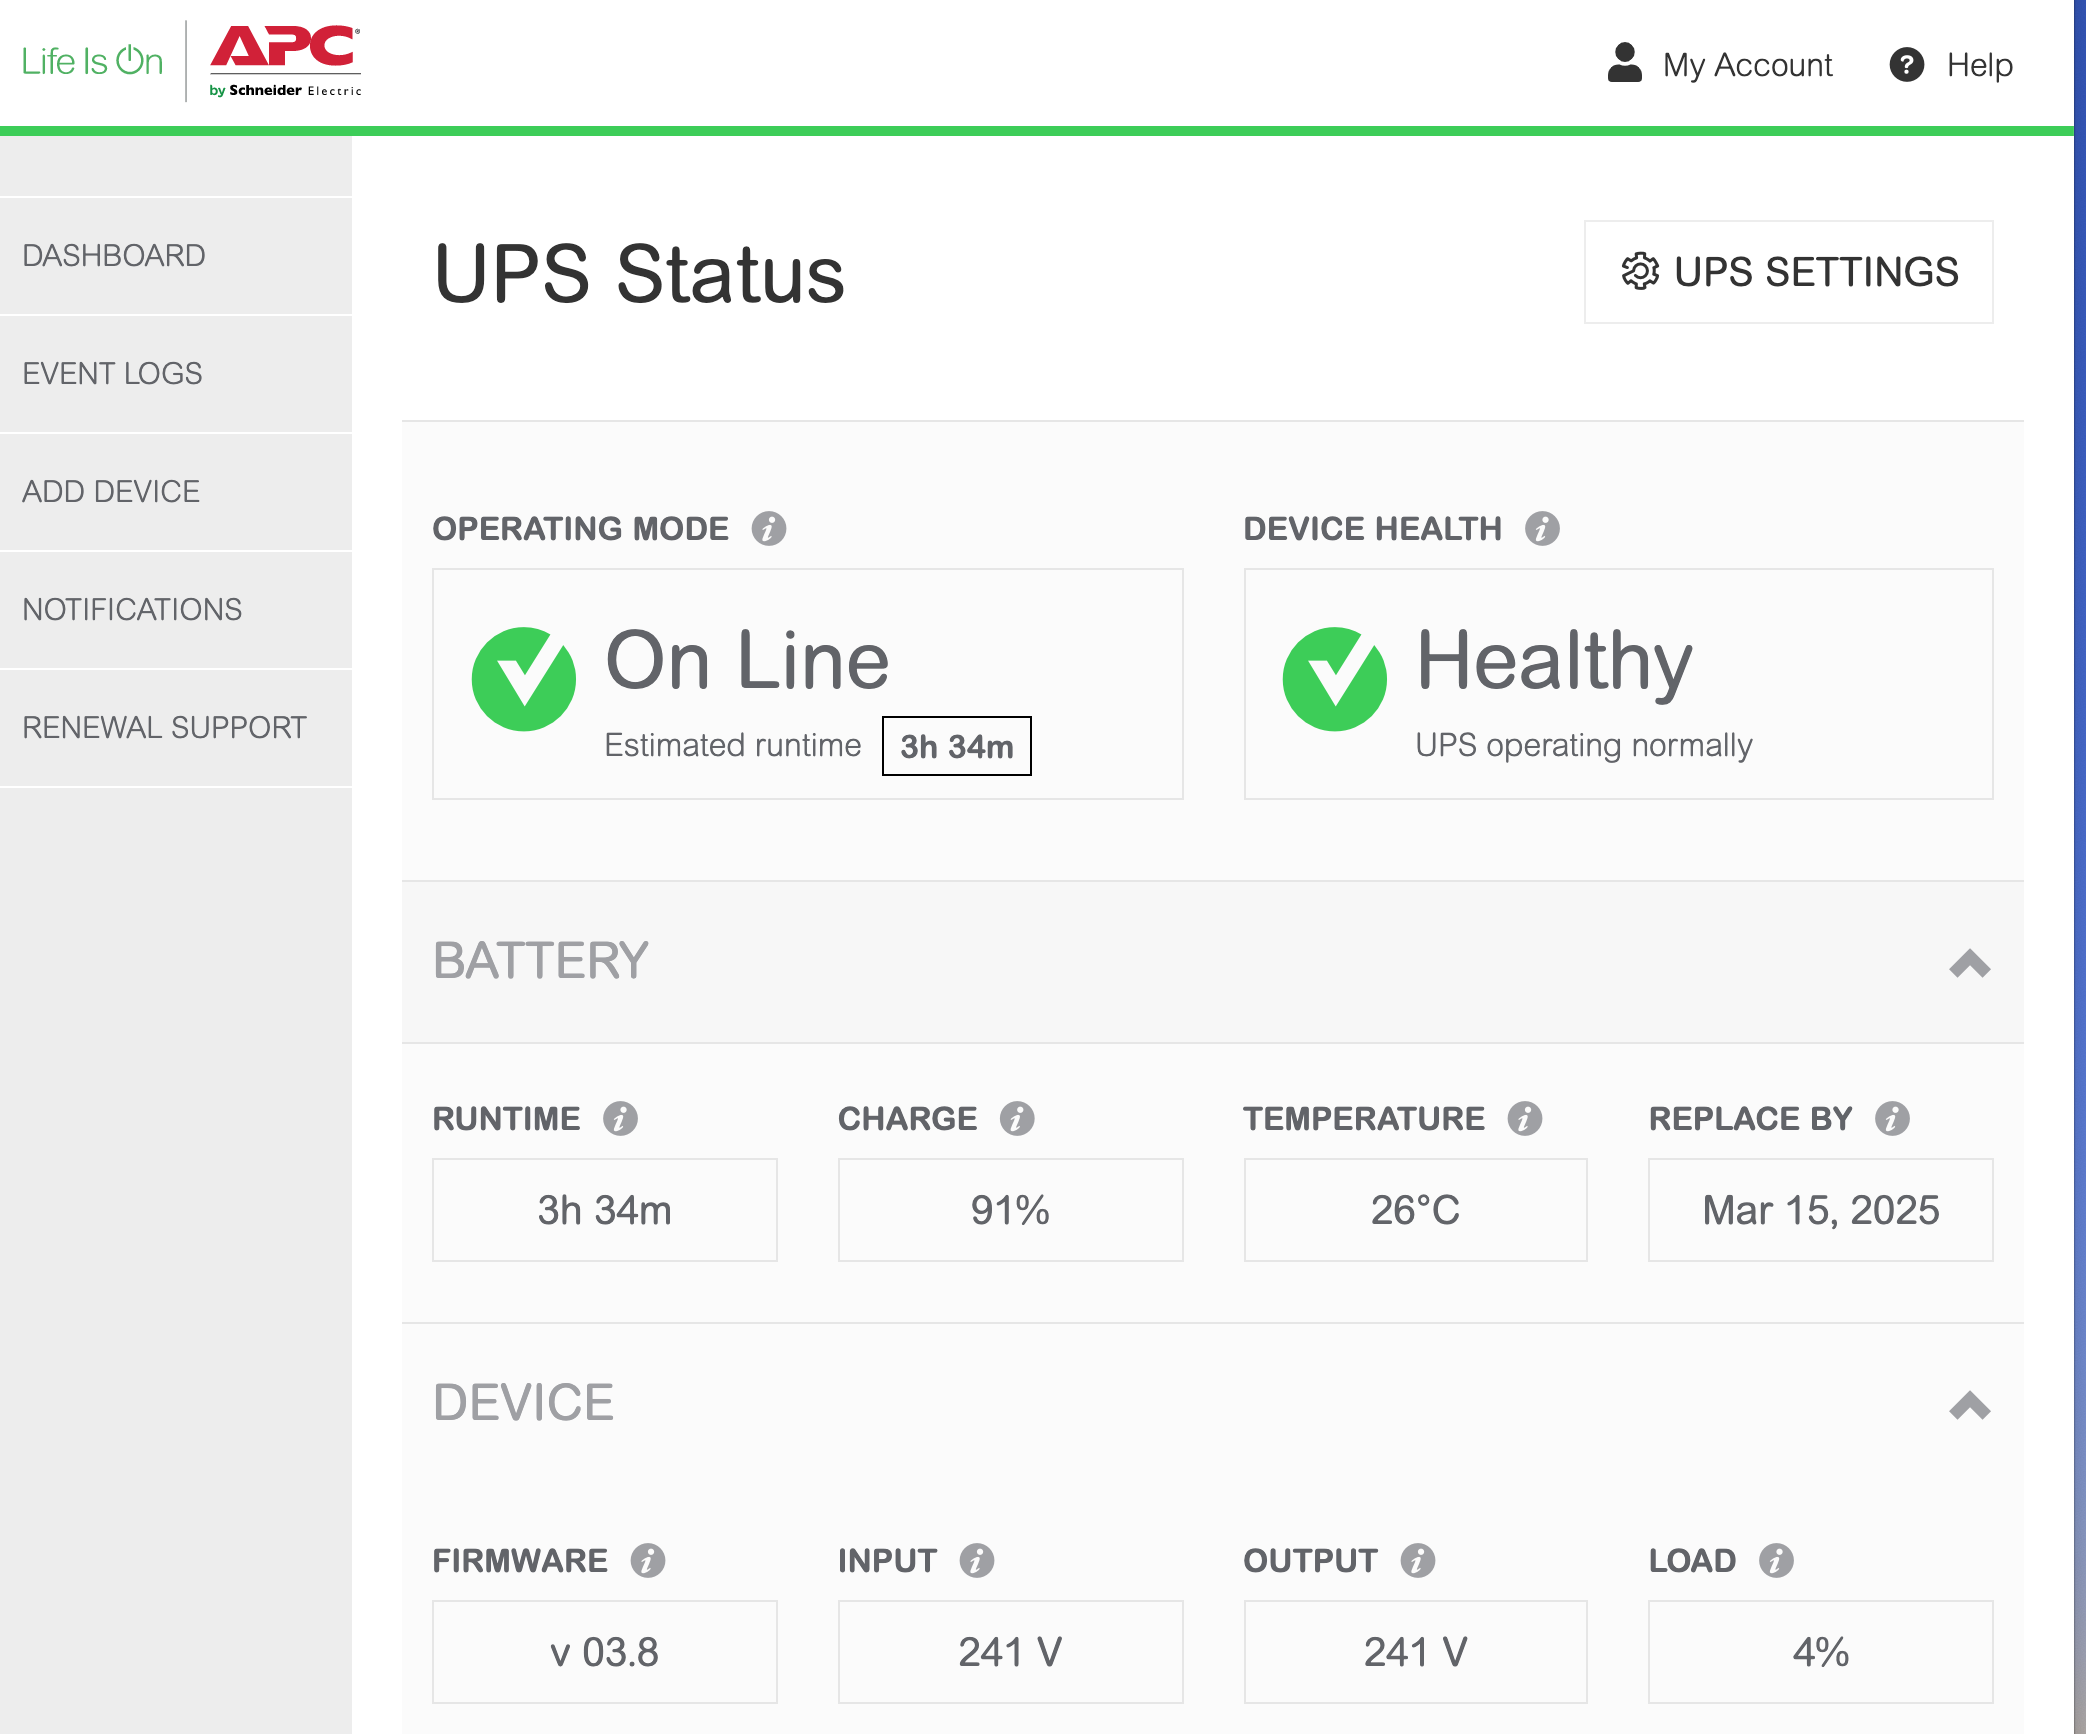 The UPS's normal status showing via the "cloud enabled" feature on APC's website